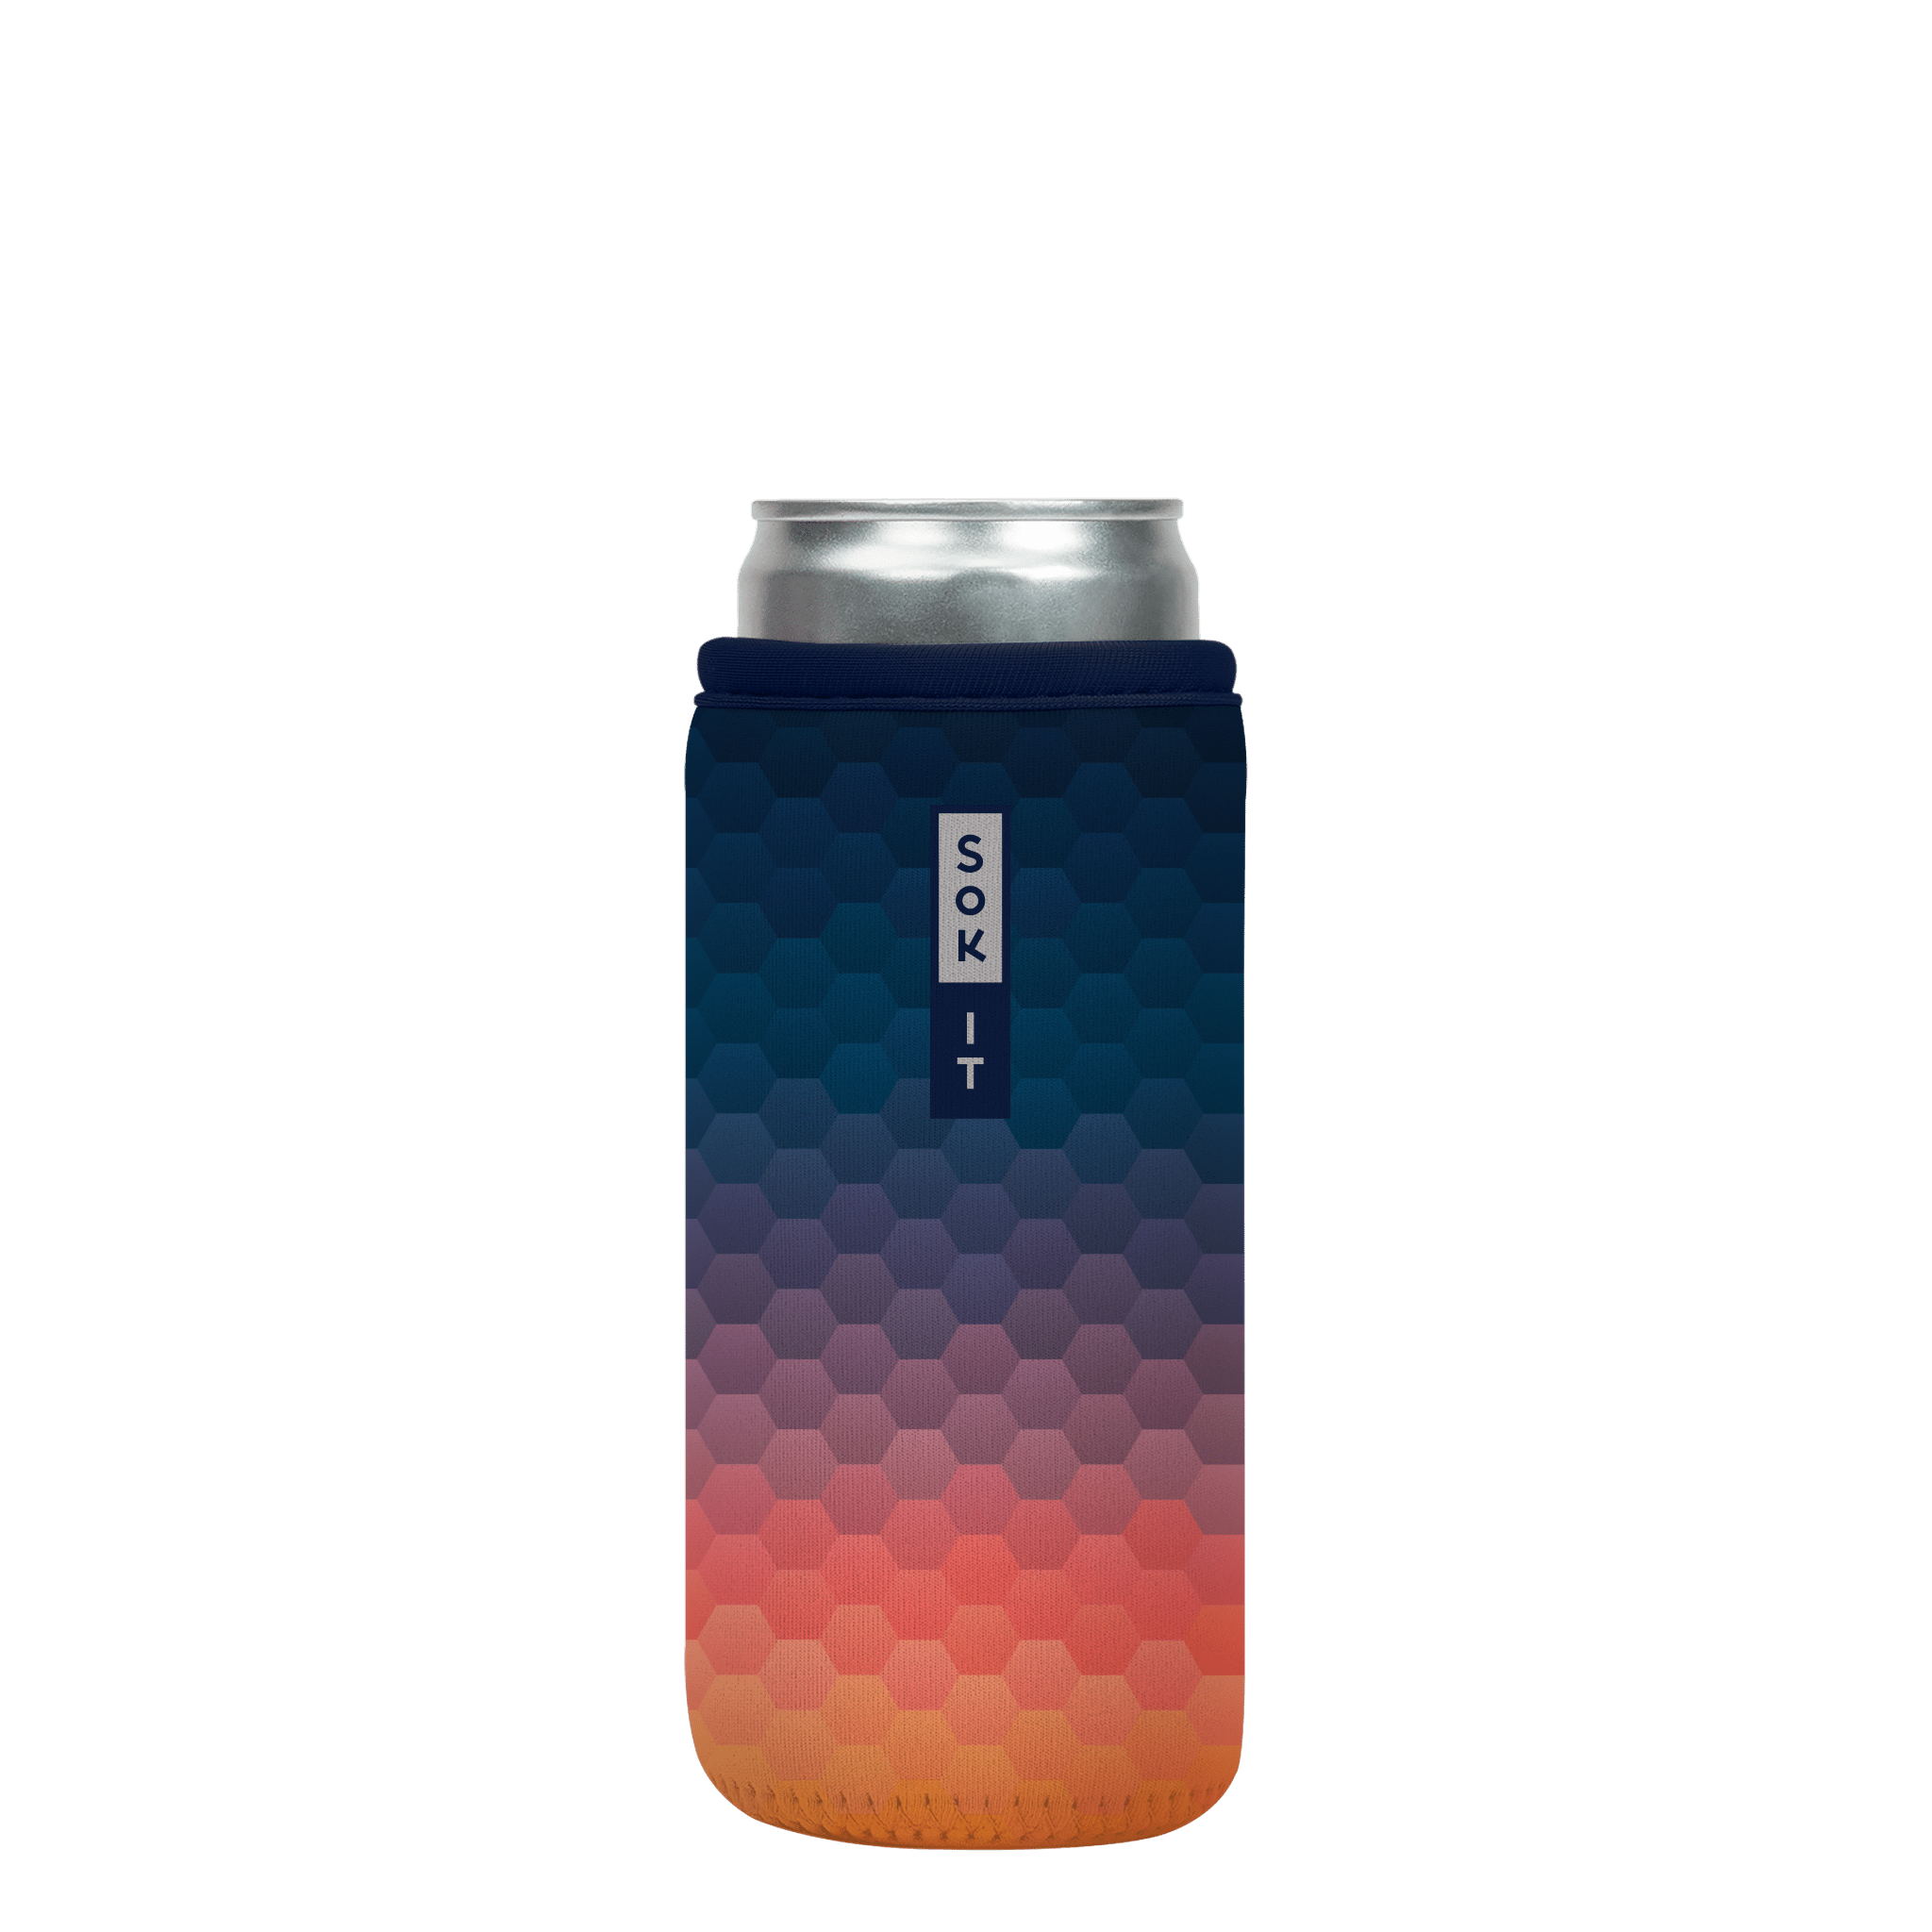 CanSok Hexagon Sunset 12oz Slim Can